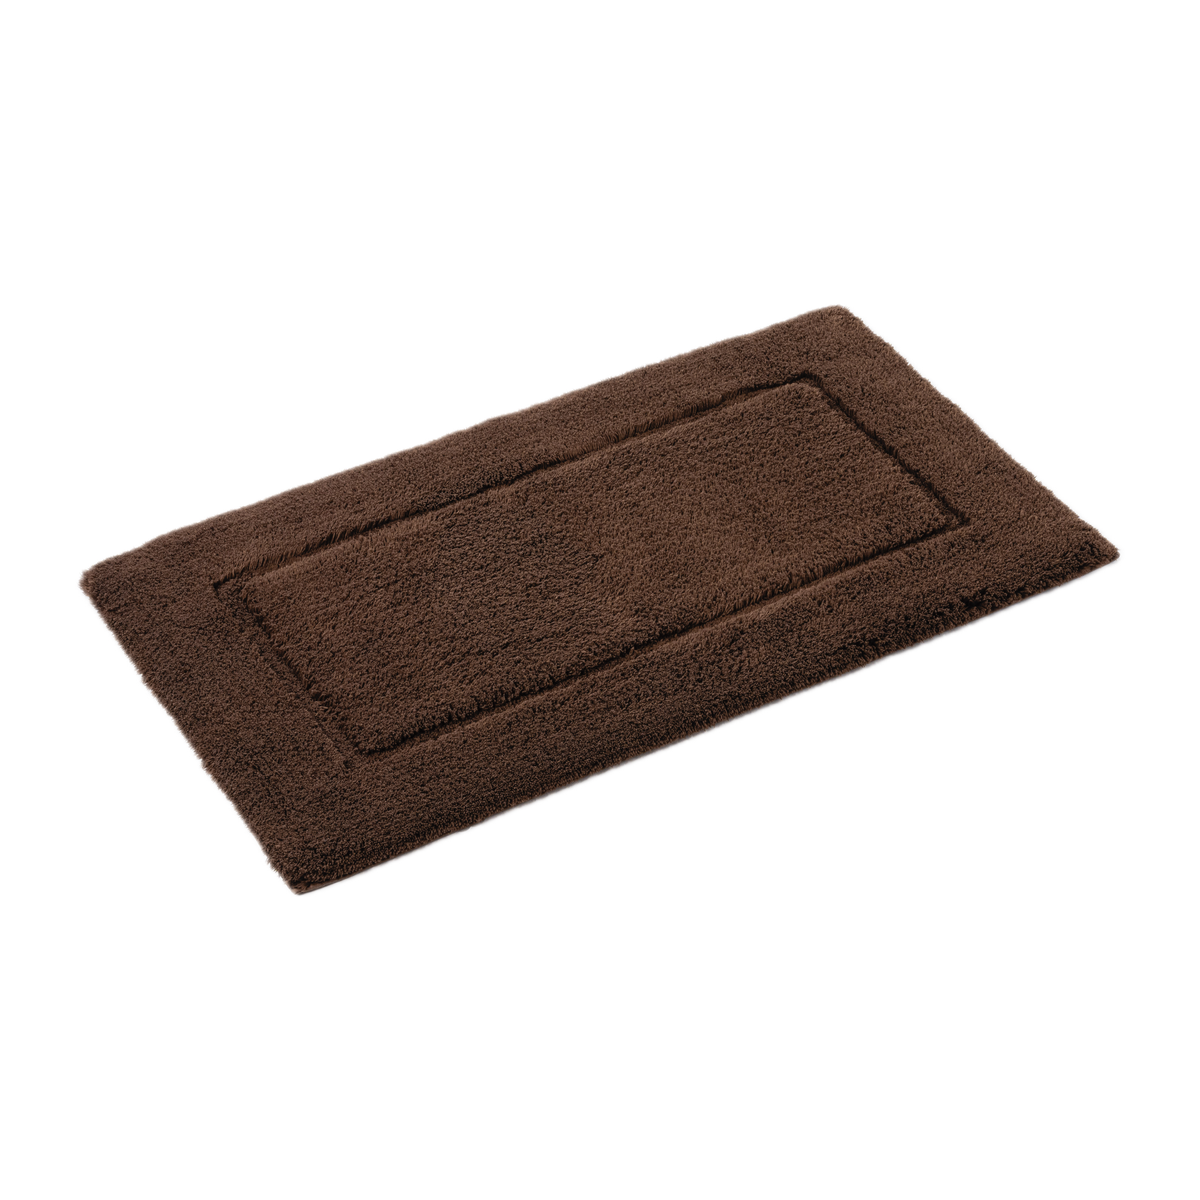 Slanted View of Abyss Habidecor Must Bath Rug in Mustang Color